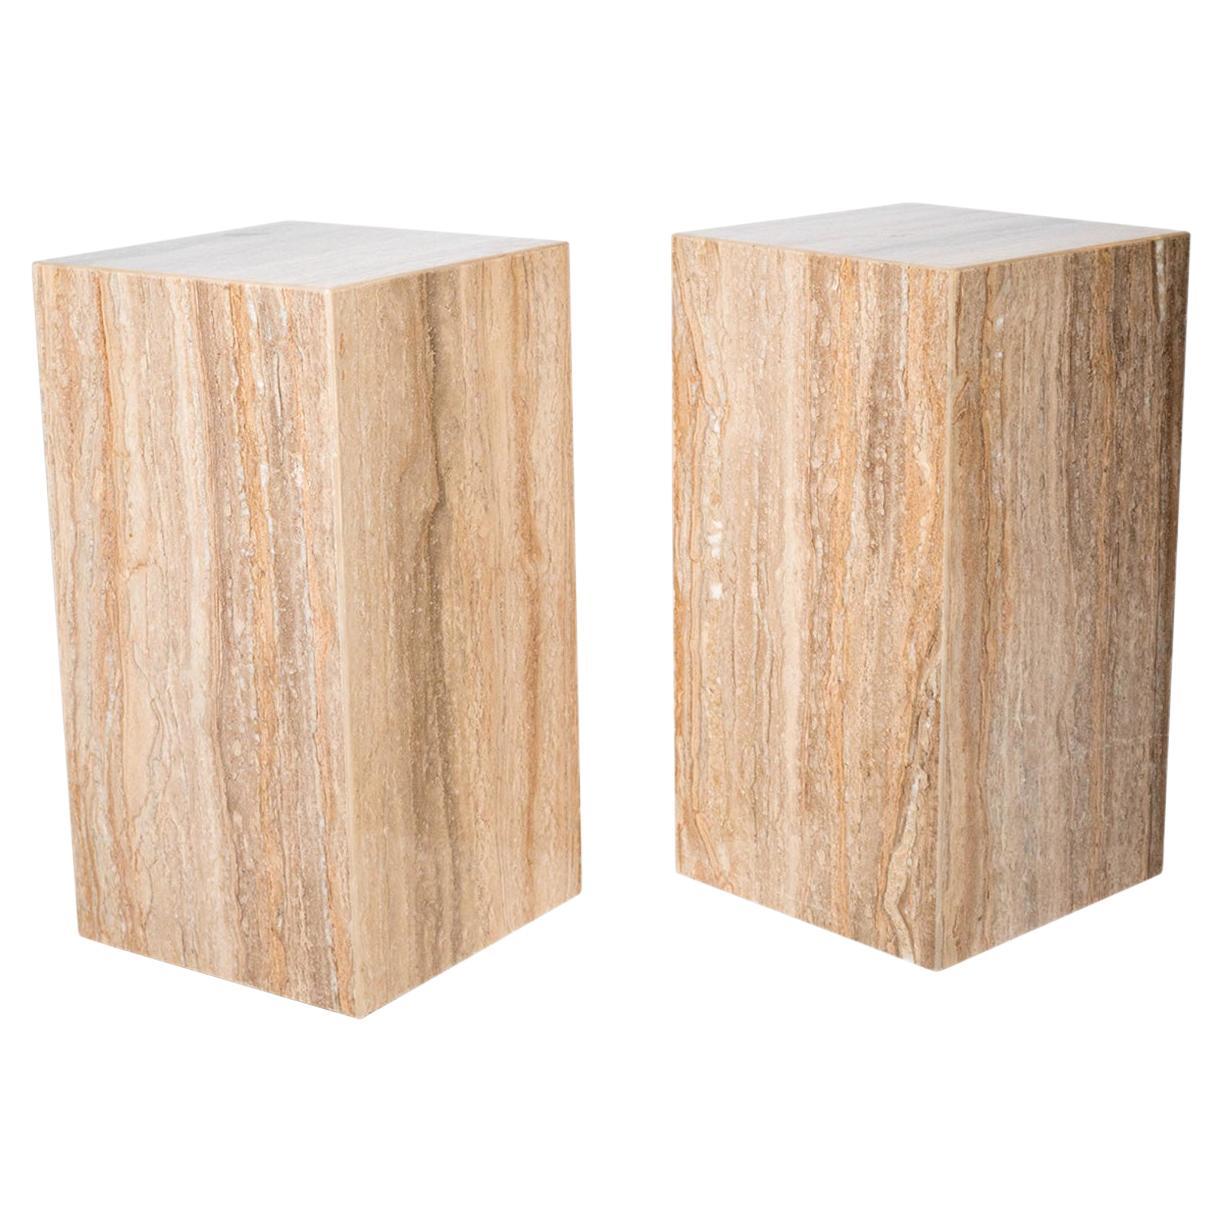 1980s Italian Polished Travertine Tower Cube Side Tables - a Pair